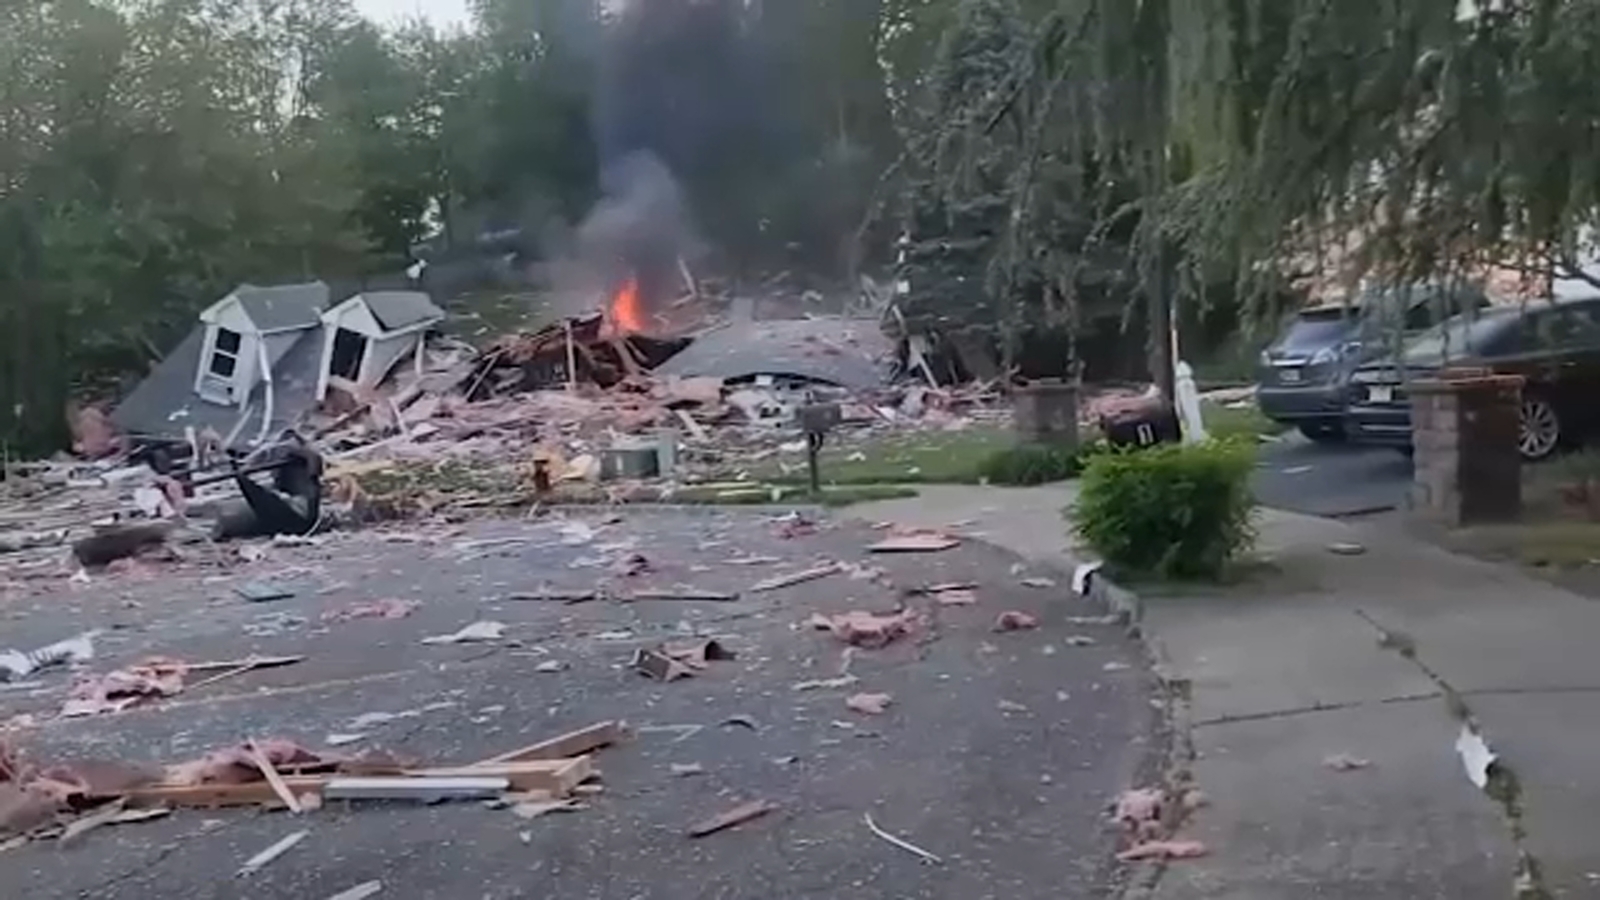 South River, New Jersey, home explosion kills retired member of Newark police force; another man injured [Video]